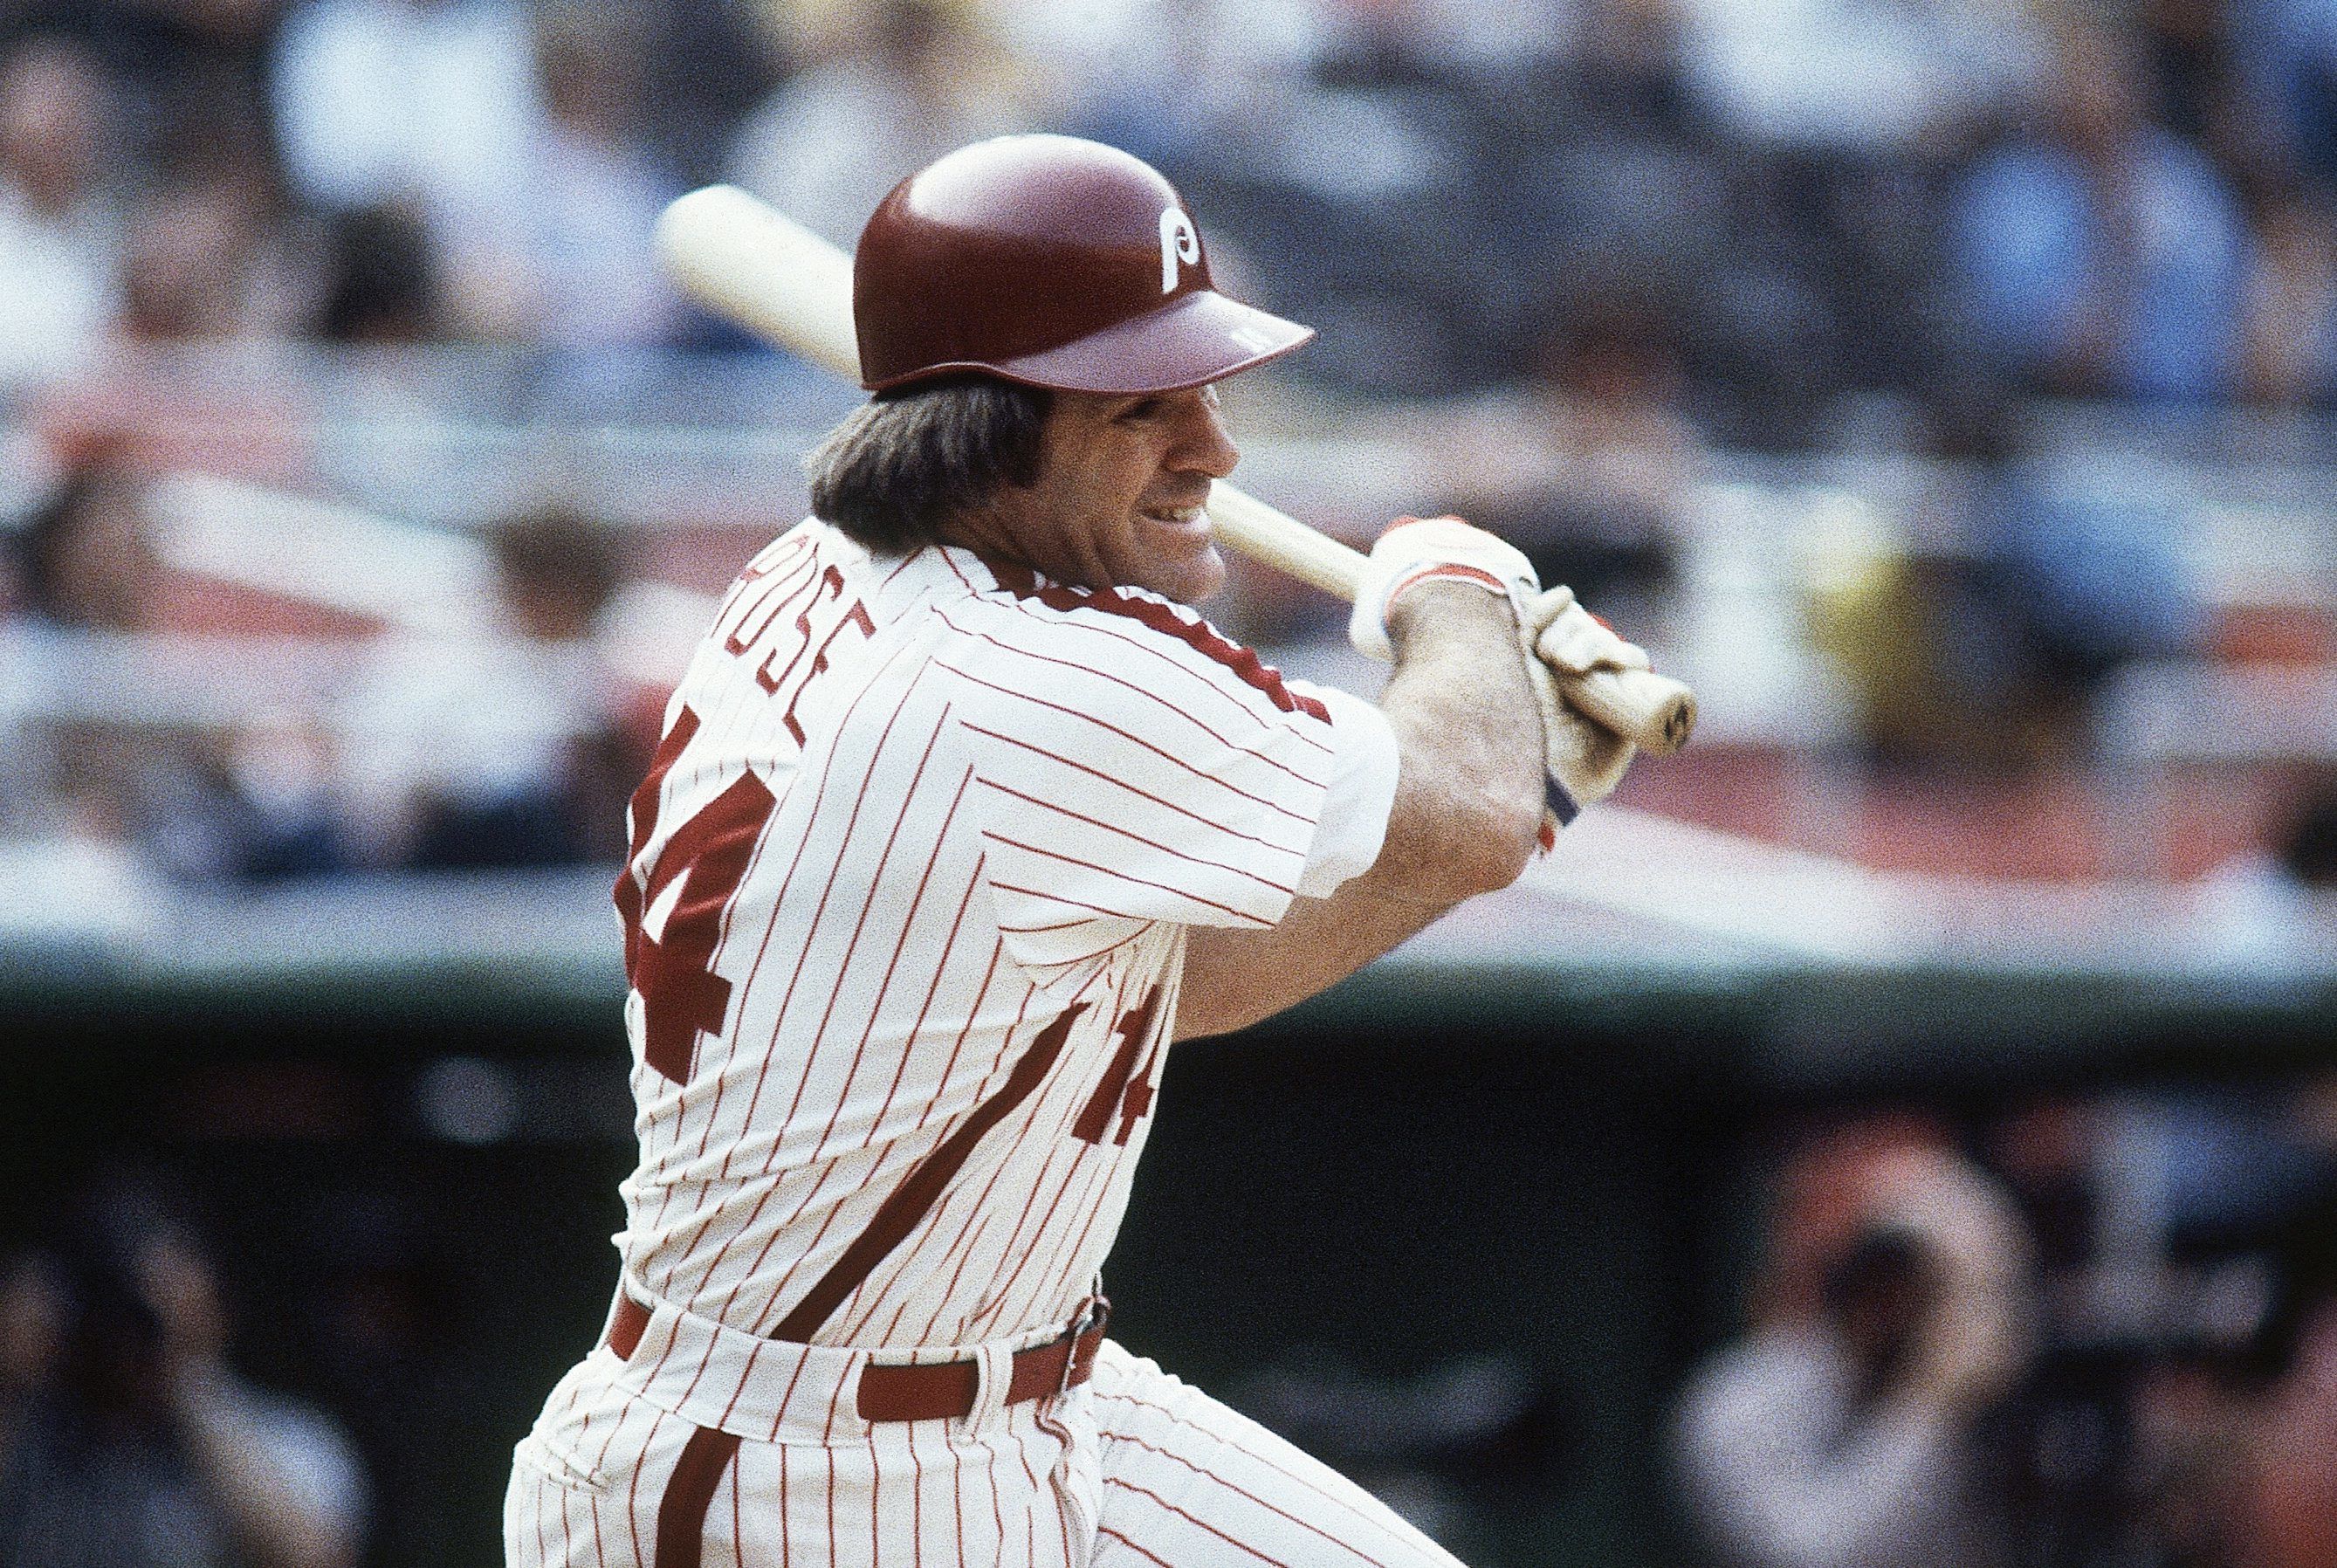 Phillies offer weak response after inviting Pete Rose back to the